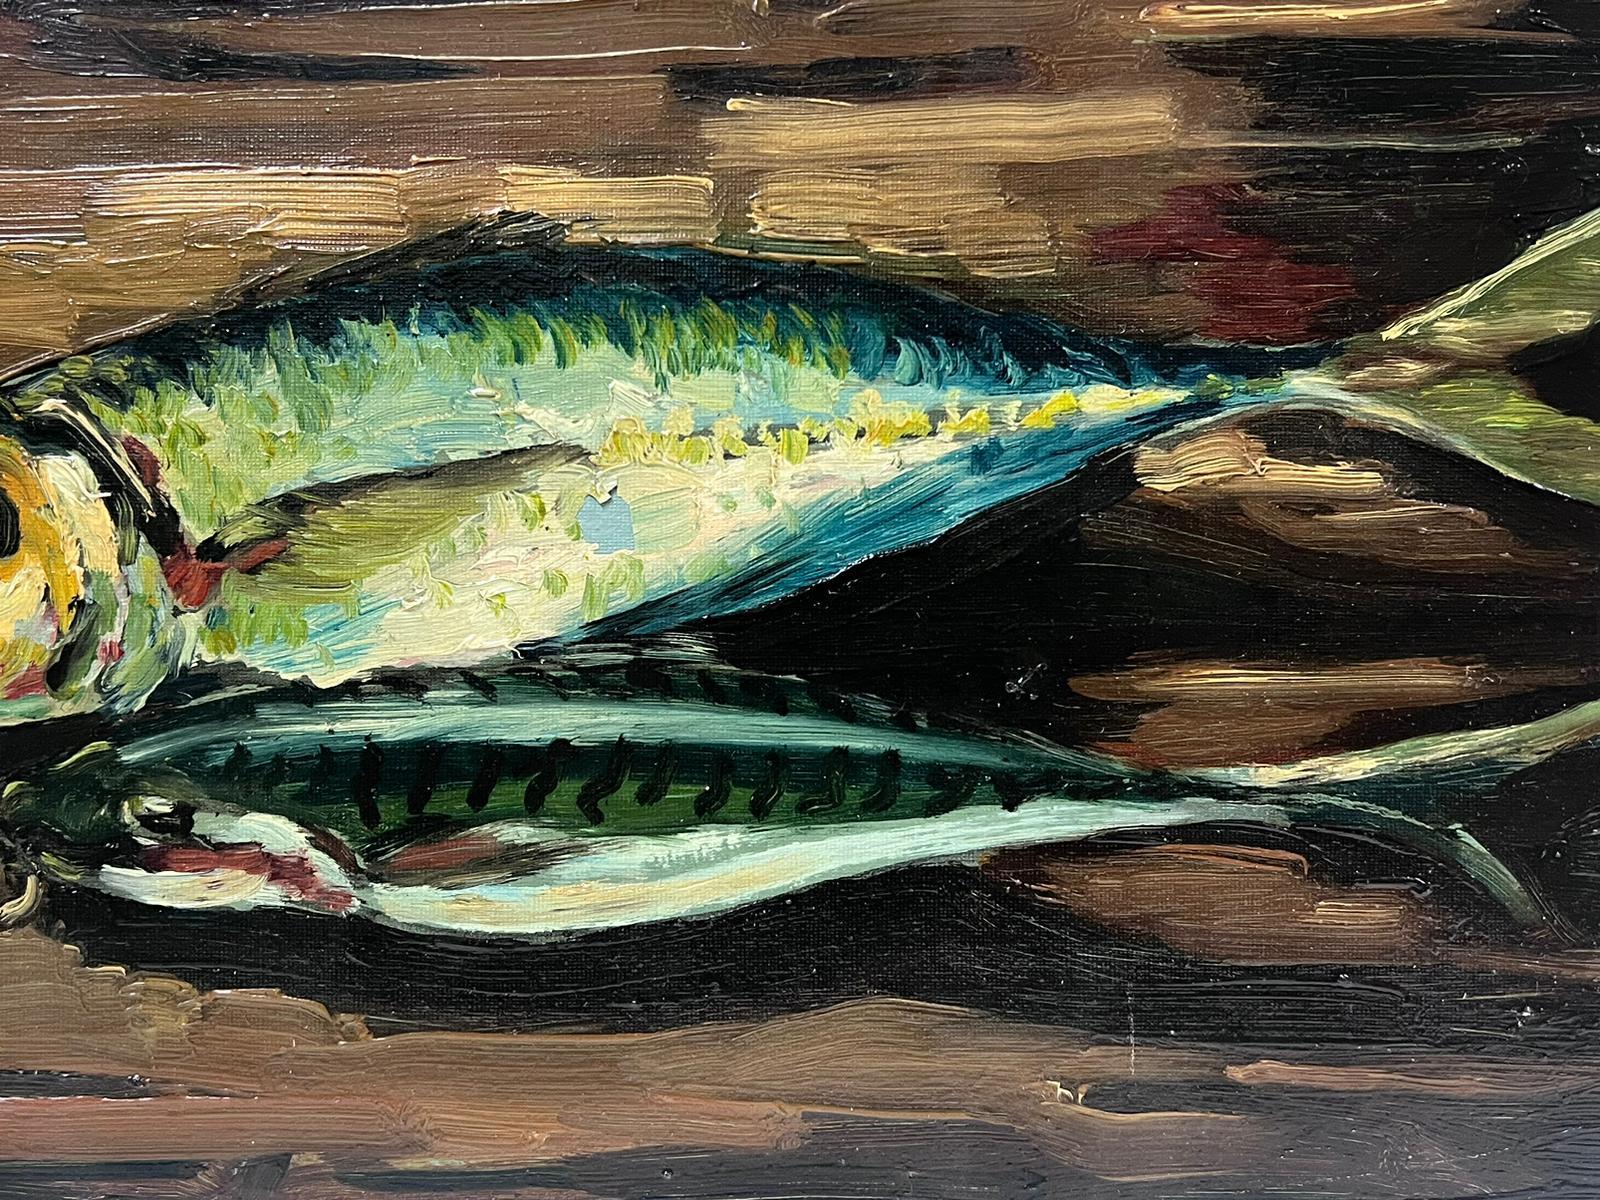 Still Life of Fish
by Georges Bordonave (French contemporary) 
oil painting on canvas, unframed
canvas: 19.75 x 16.75 inches
condition: very good
provenance: from a large private collection of this artists work, western Paris, France. 